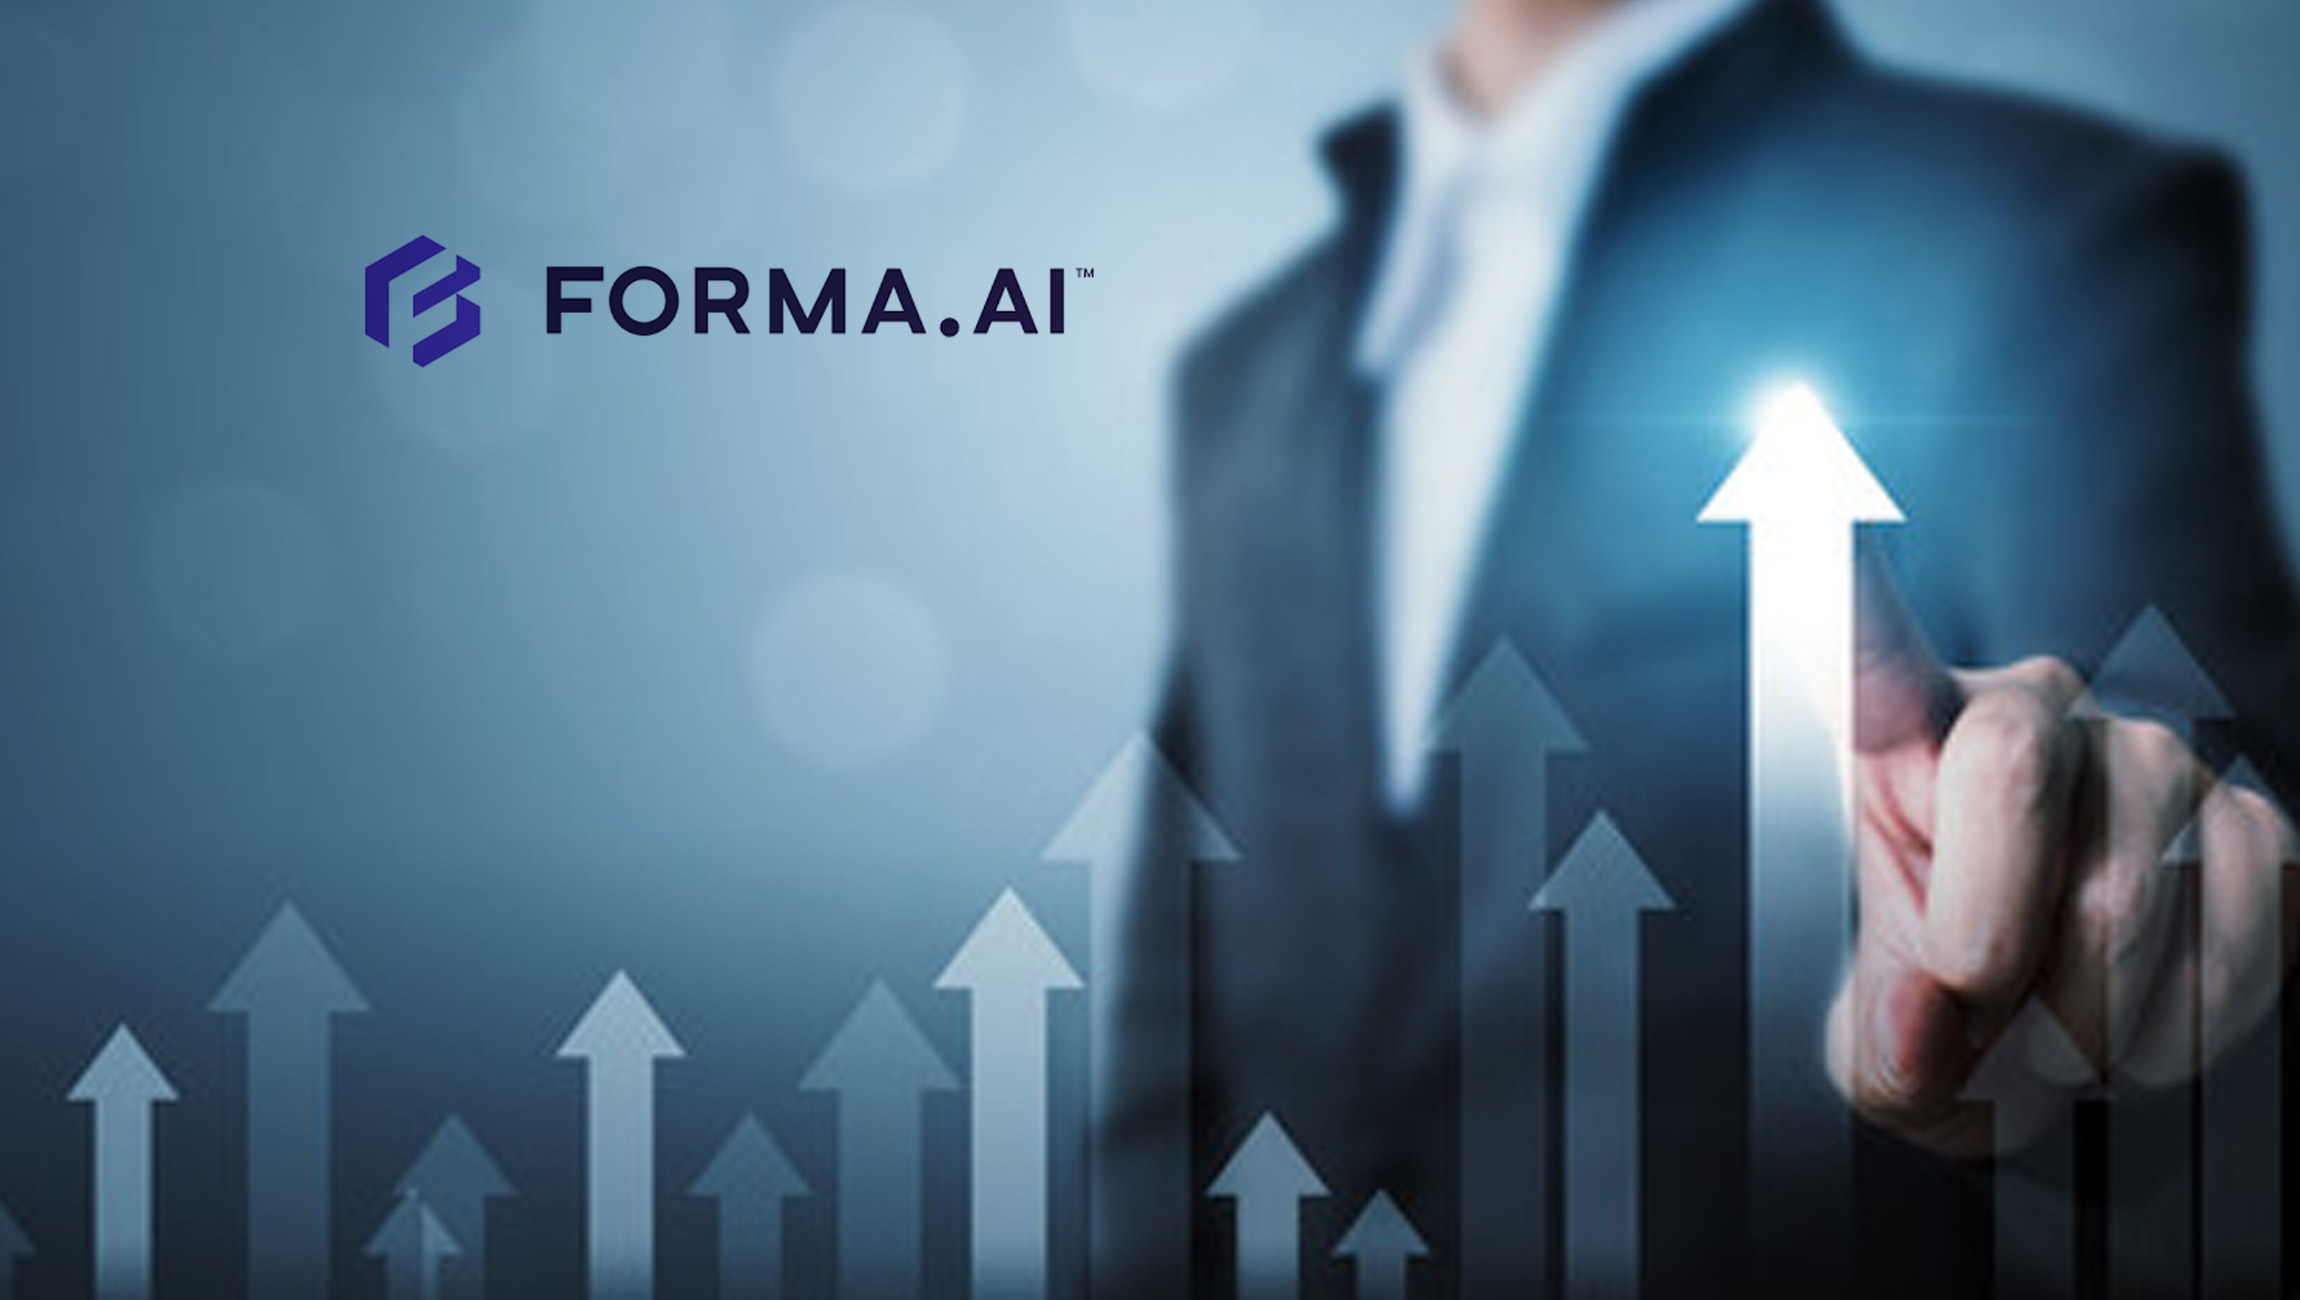 Forma.ai Builds for Continued Success with Key Strategic Growth Hires